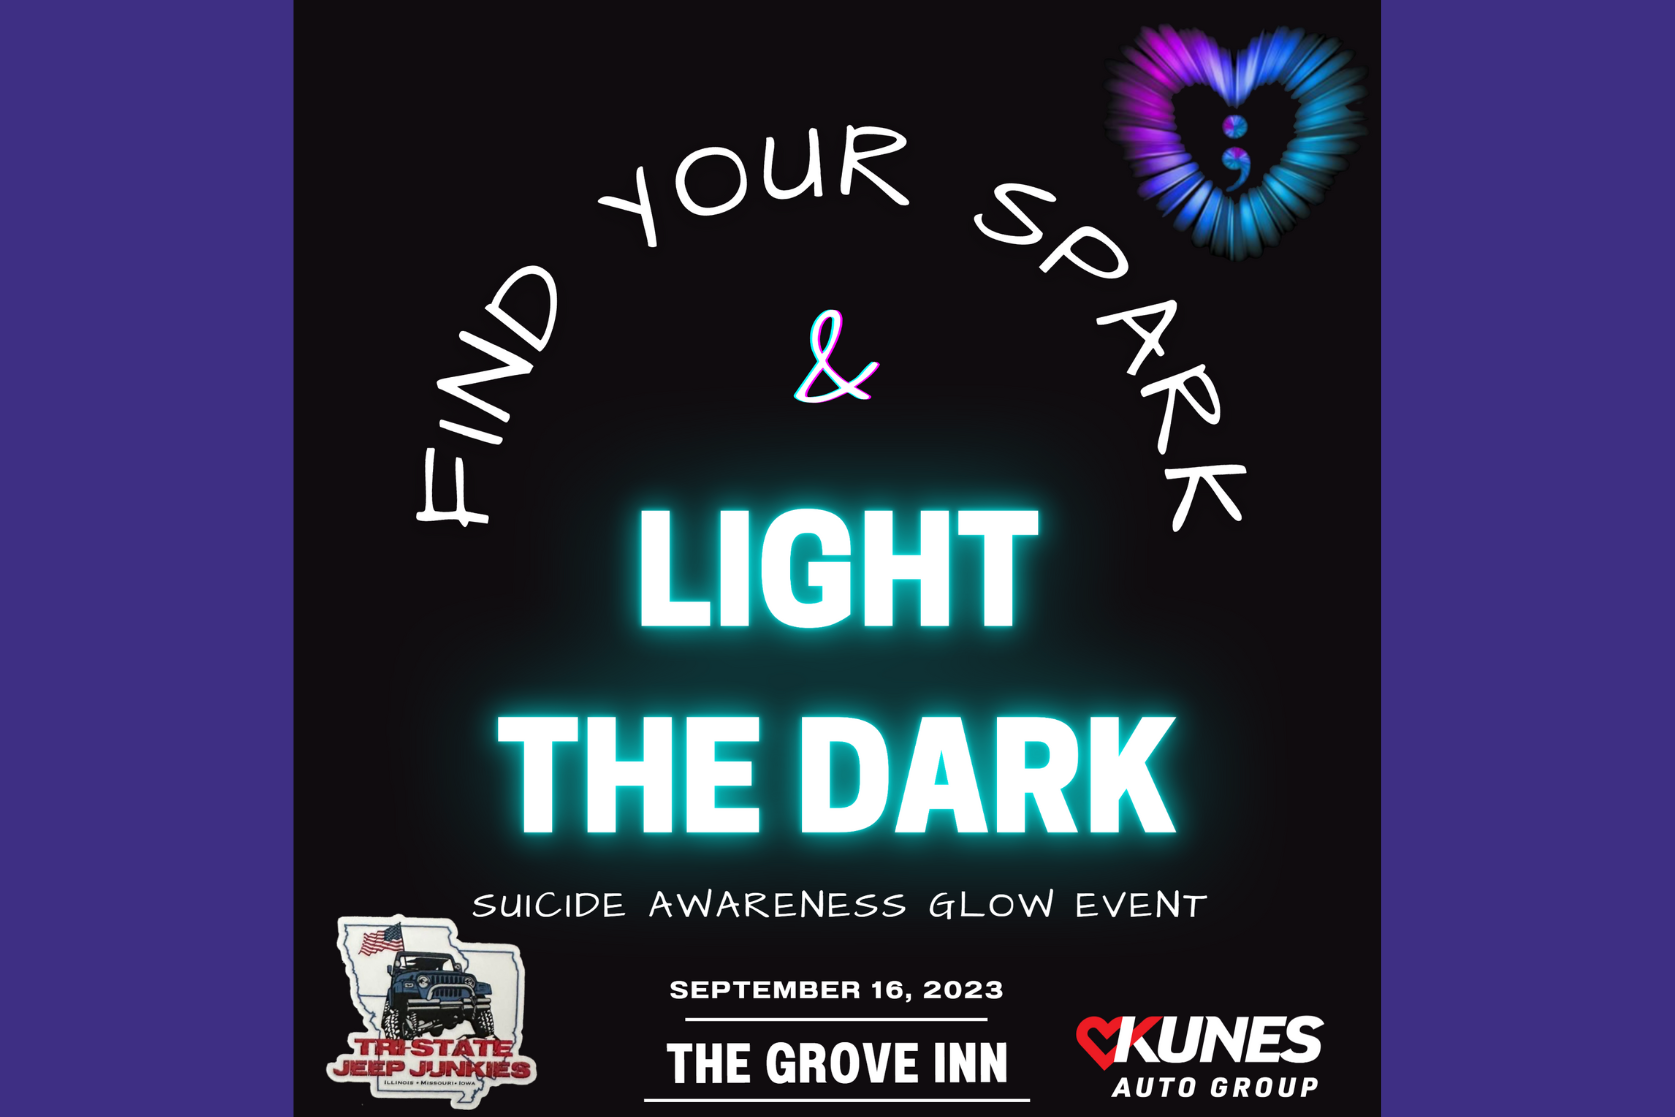 Text: Find Your Spark and Light the Dark; Suicide Awareness Glow Event, September 16, 2023; Tri-State Jeep Junkies, The Grove Inn, Kunes Auto Group